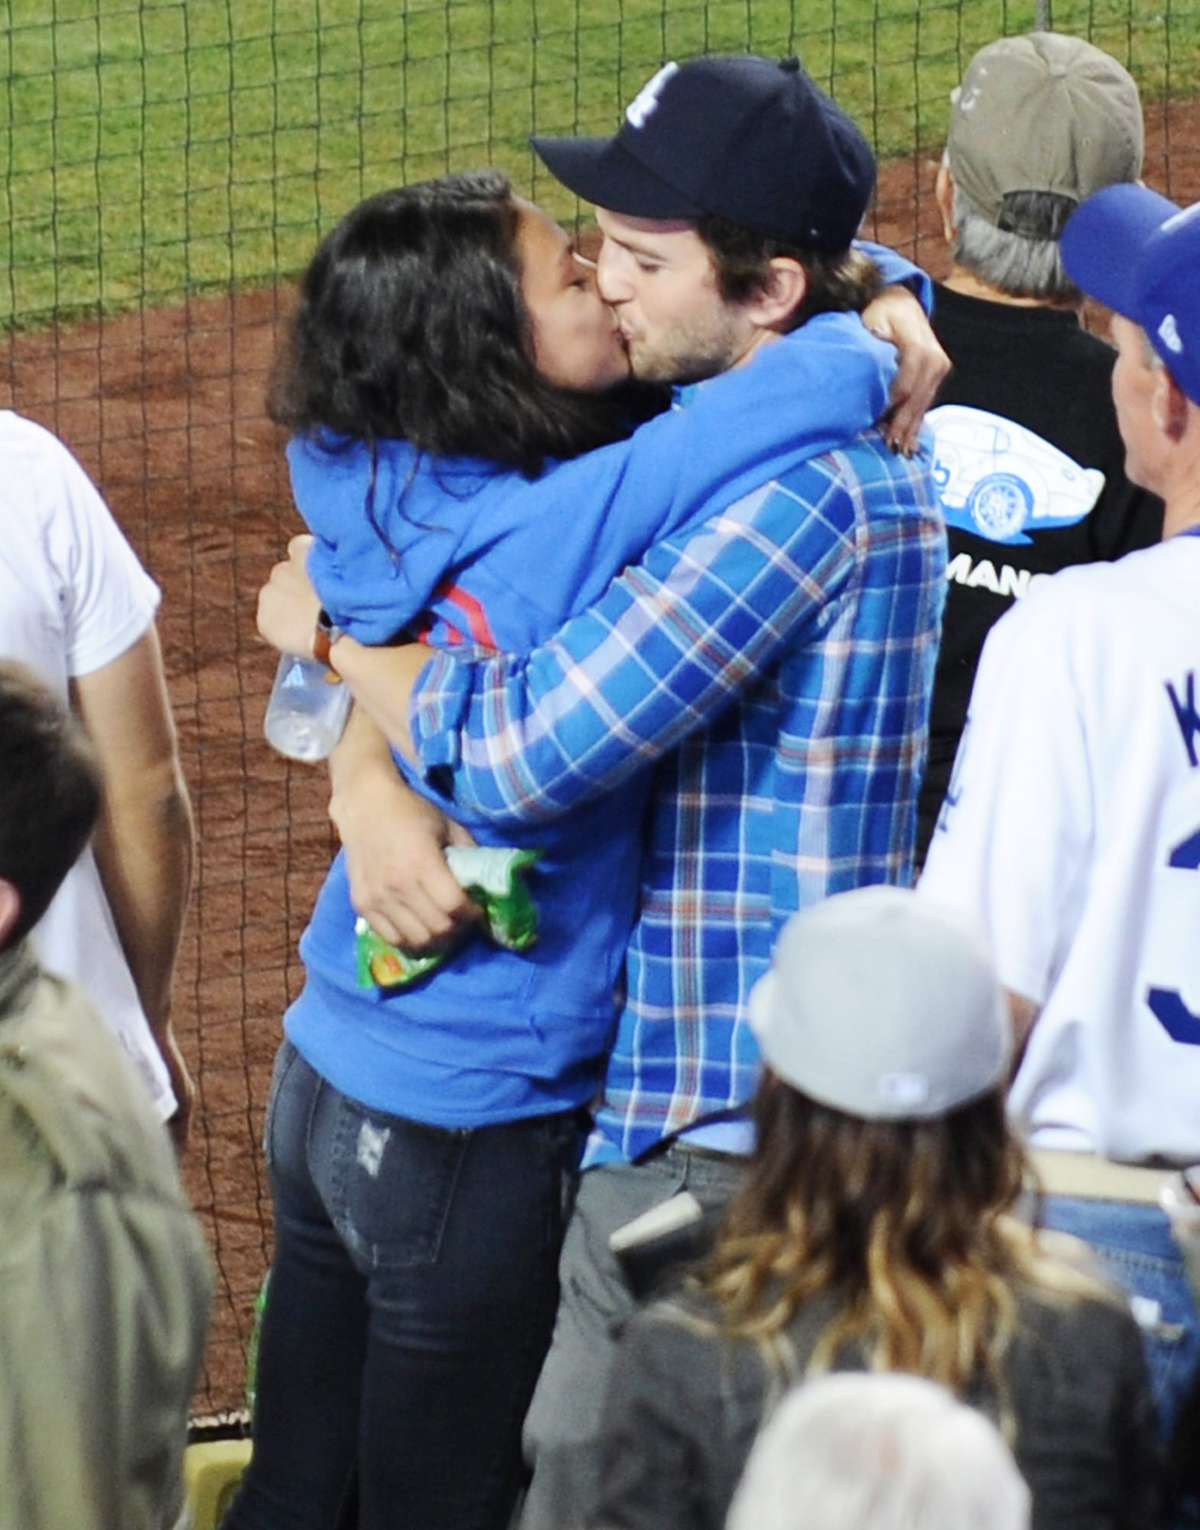 EXCLUSIVE: **PREMIUM EXCLUSIVE RATES APPLY** STRICTLY NO WEB UNTIL 130PM PST SEPTEMBER 3rd 2015**  Mila Kunis and Ashton Kutcher kiss while celebrating a home run at Dodgers baseball game